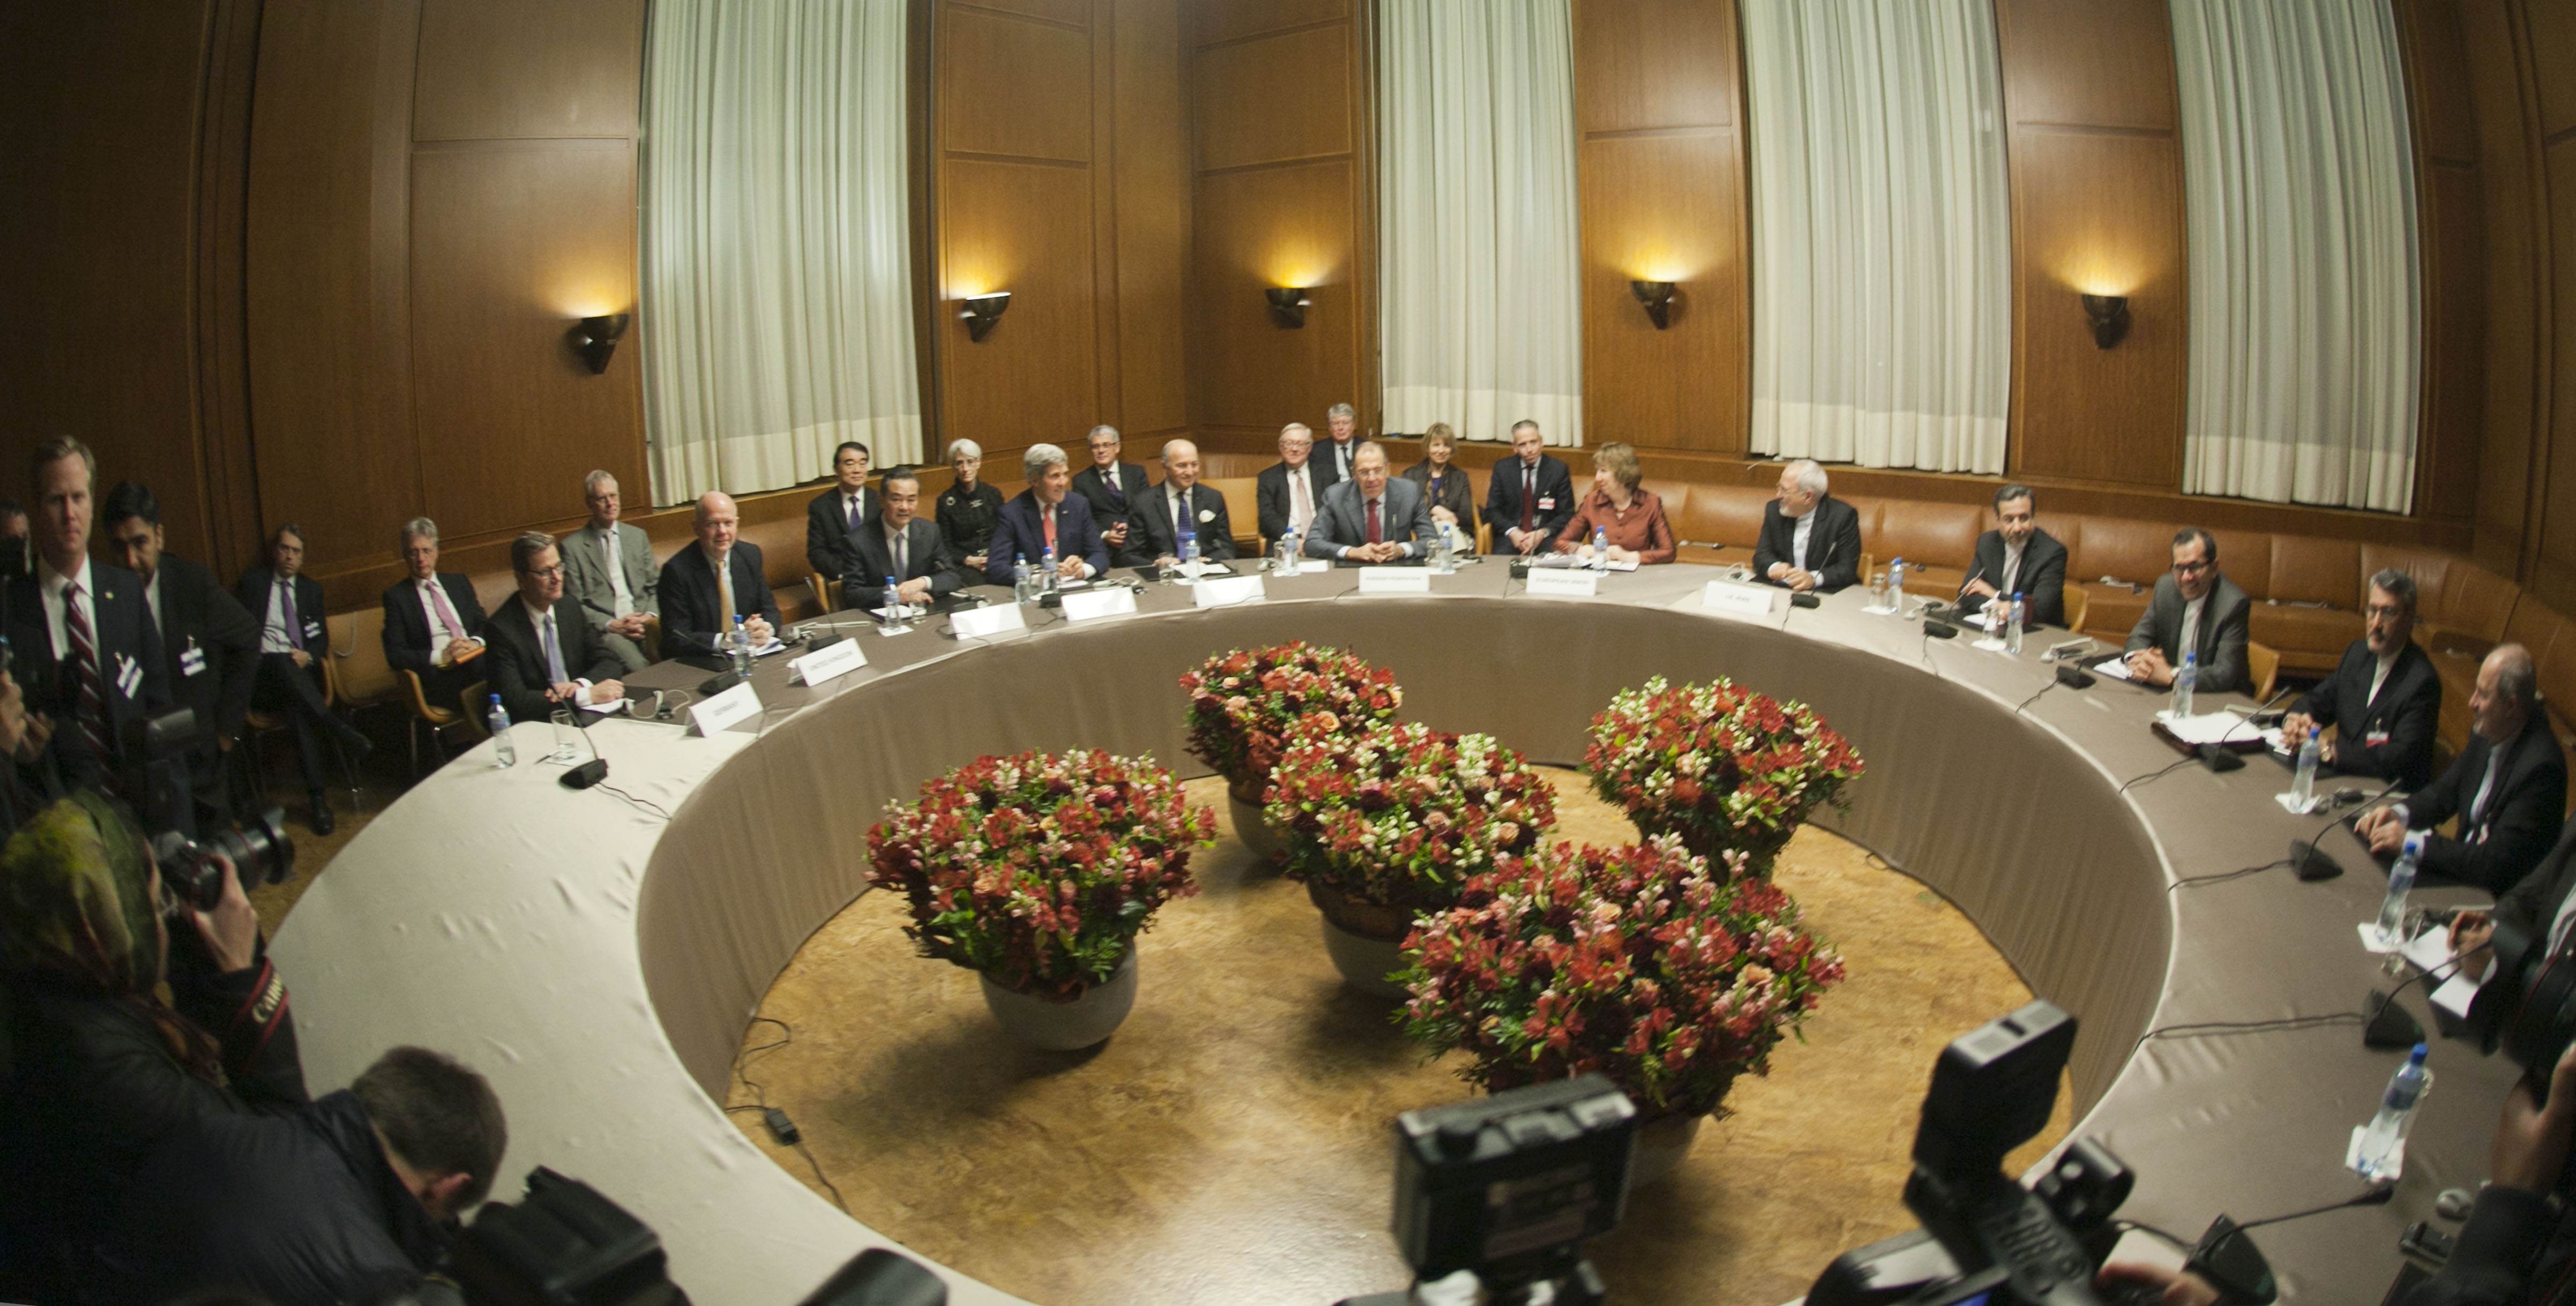  Ministers of Germany, U. K., China, U. S, France, Russia, the European Union and Iran in Geneva for the interim agreement on the Iranian nuclear program, November 2013. (Wikimedia) 